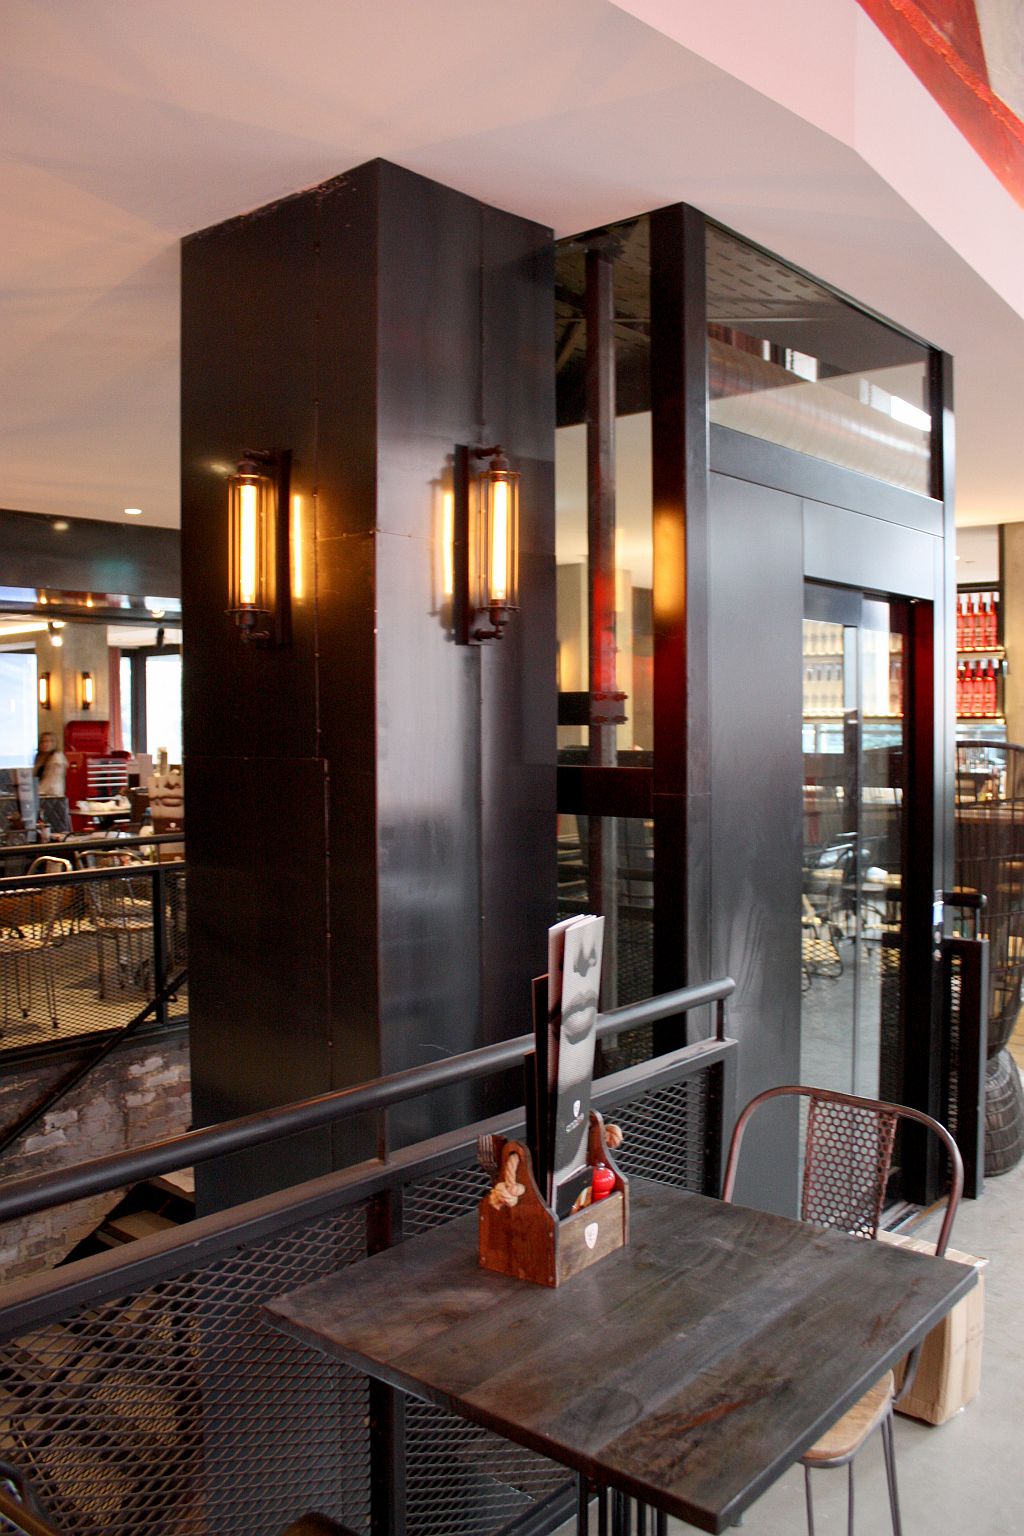 Examples of lifts in bars and restaurants